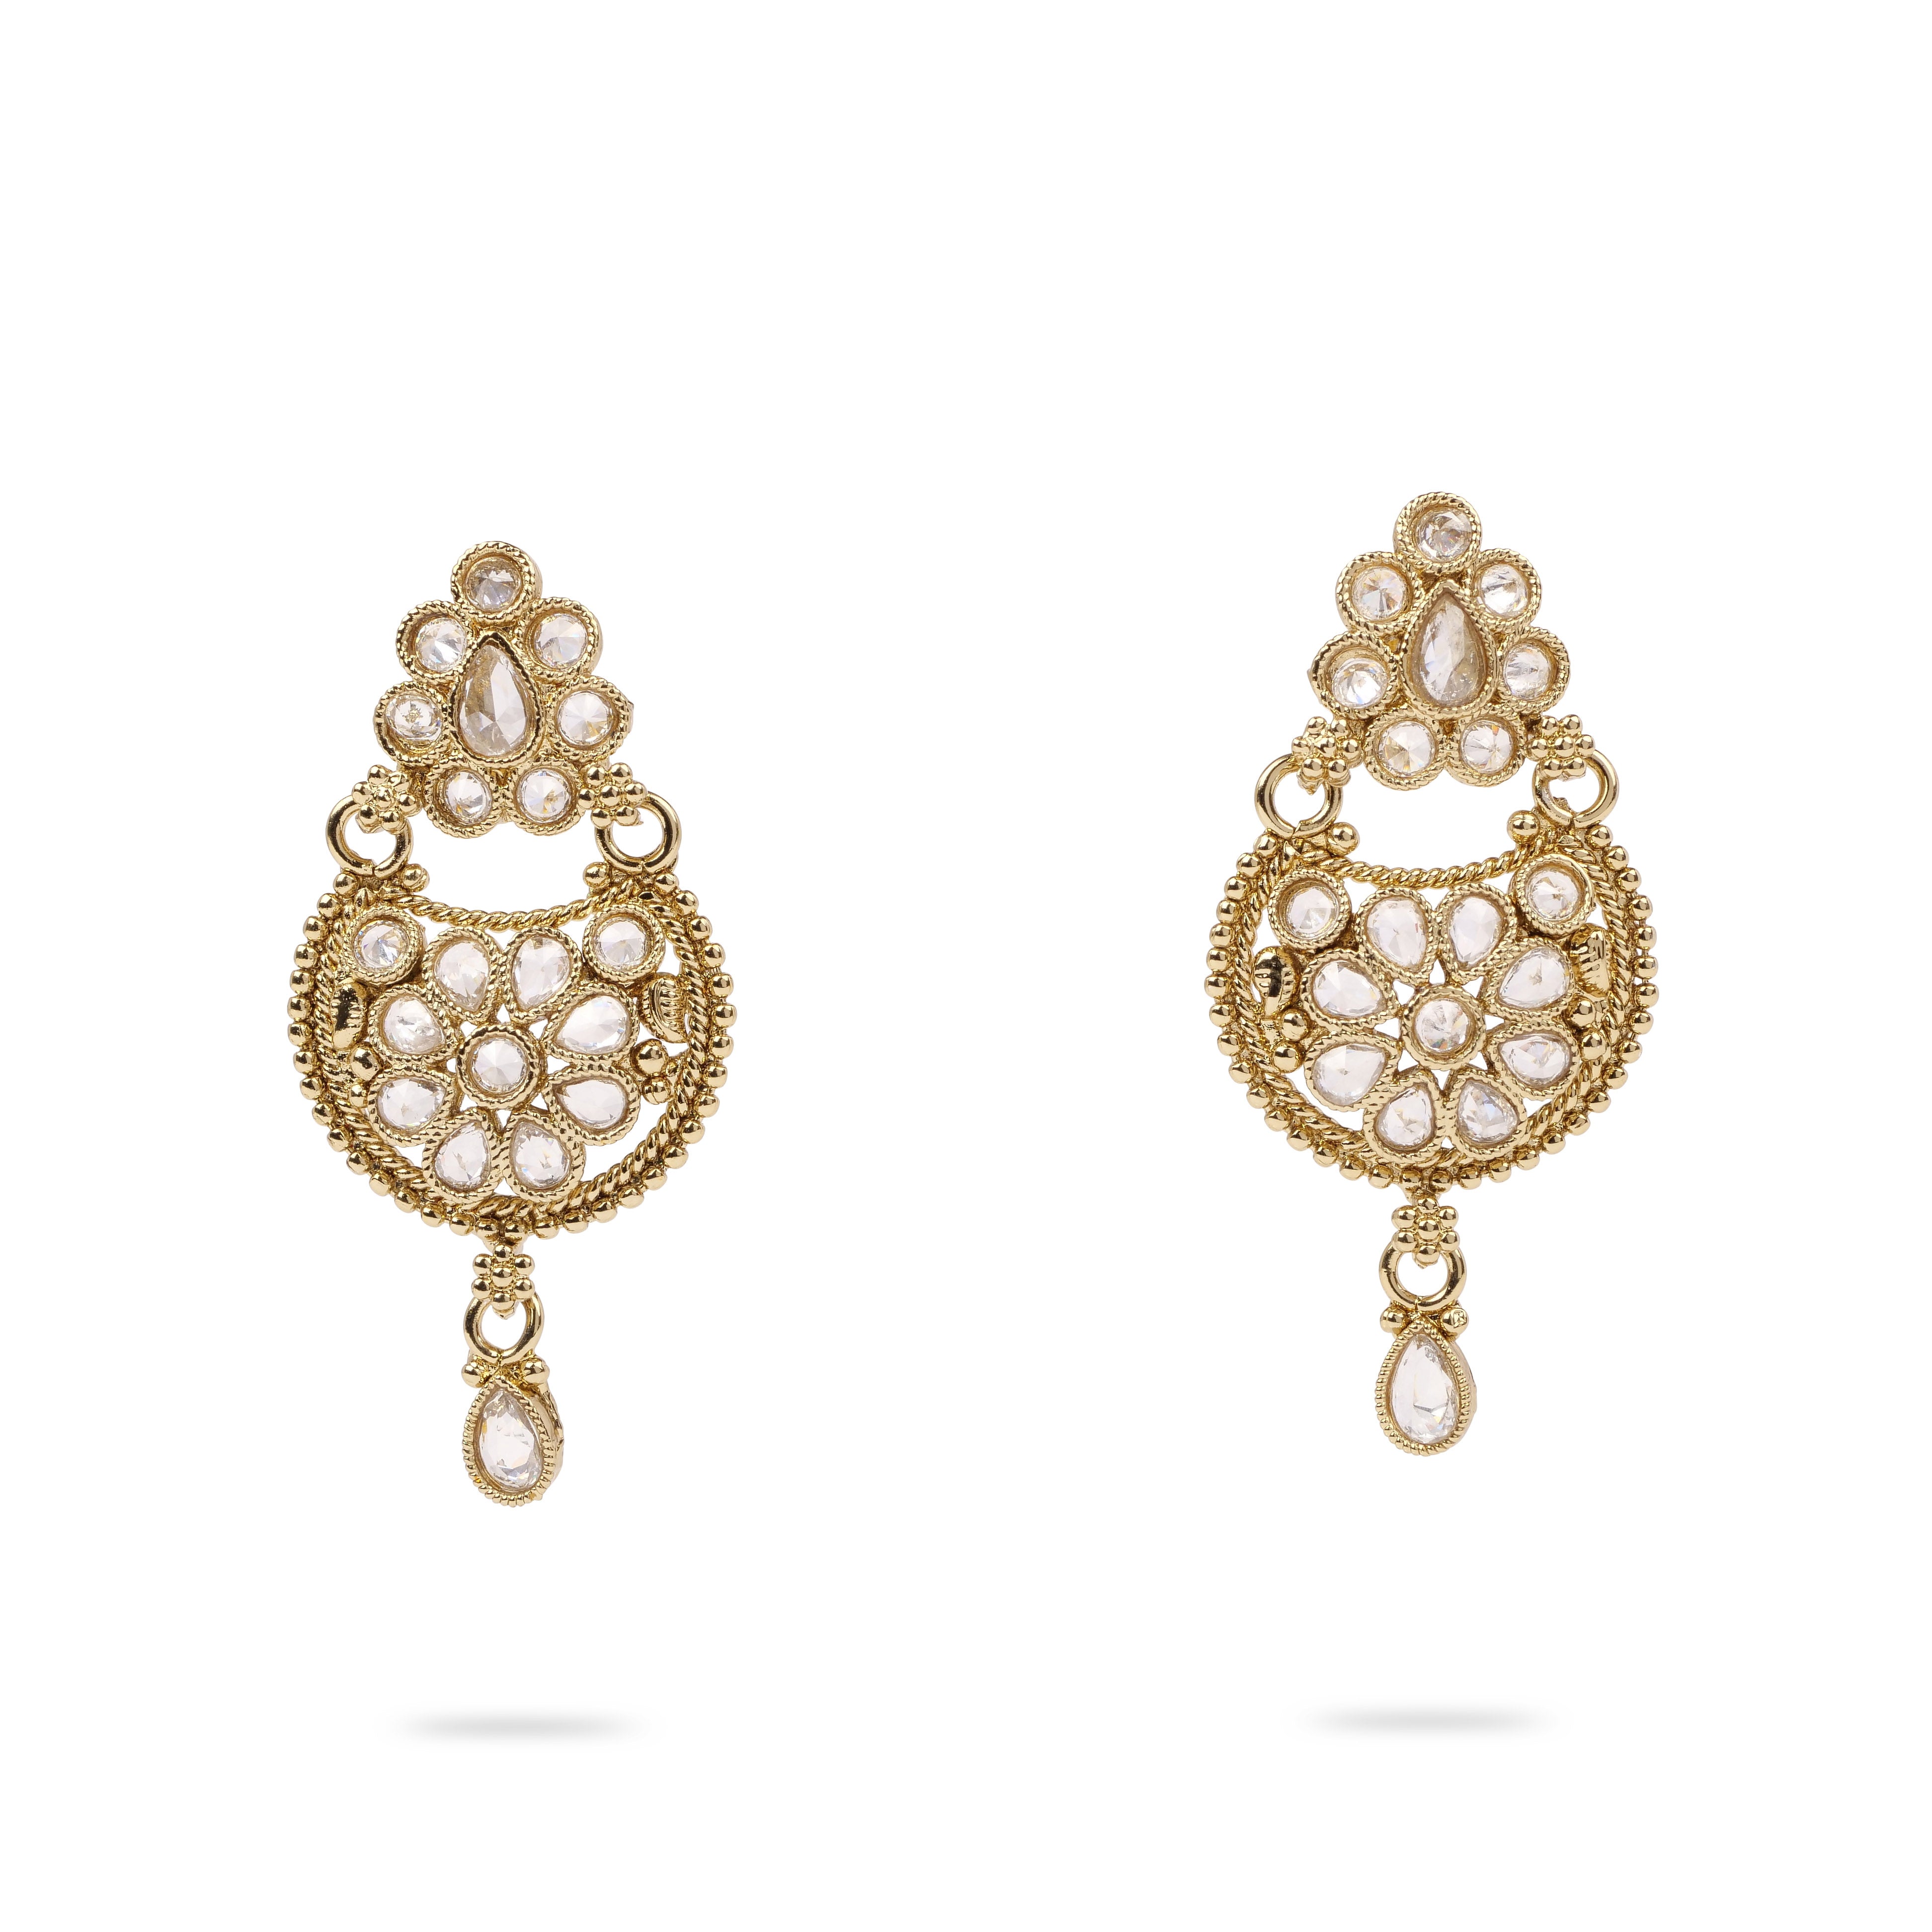 Raniya Antique Earrings with White Crystal